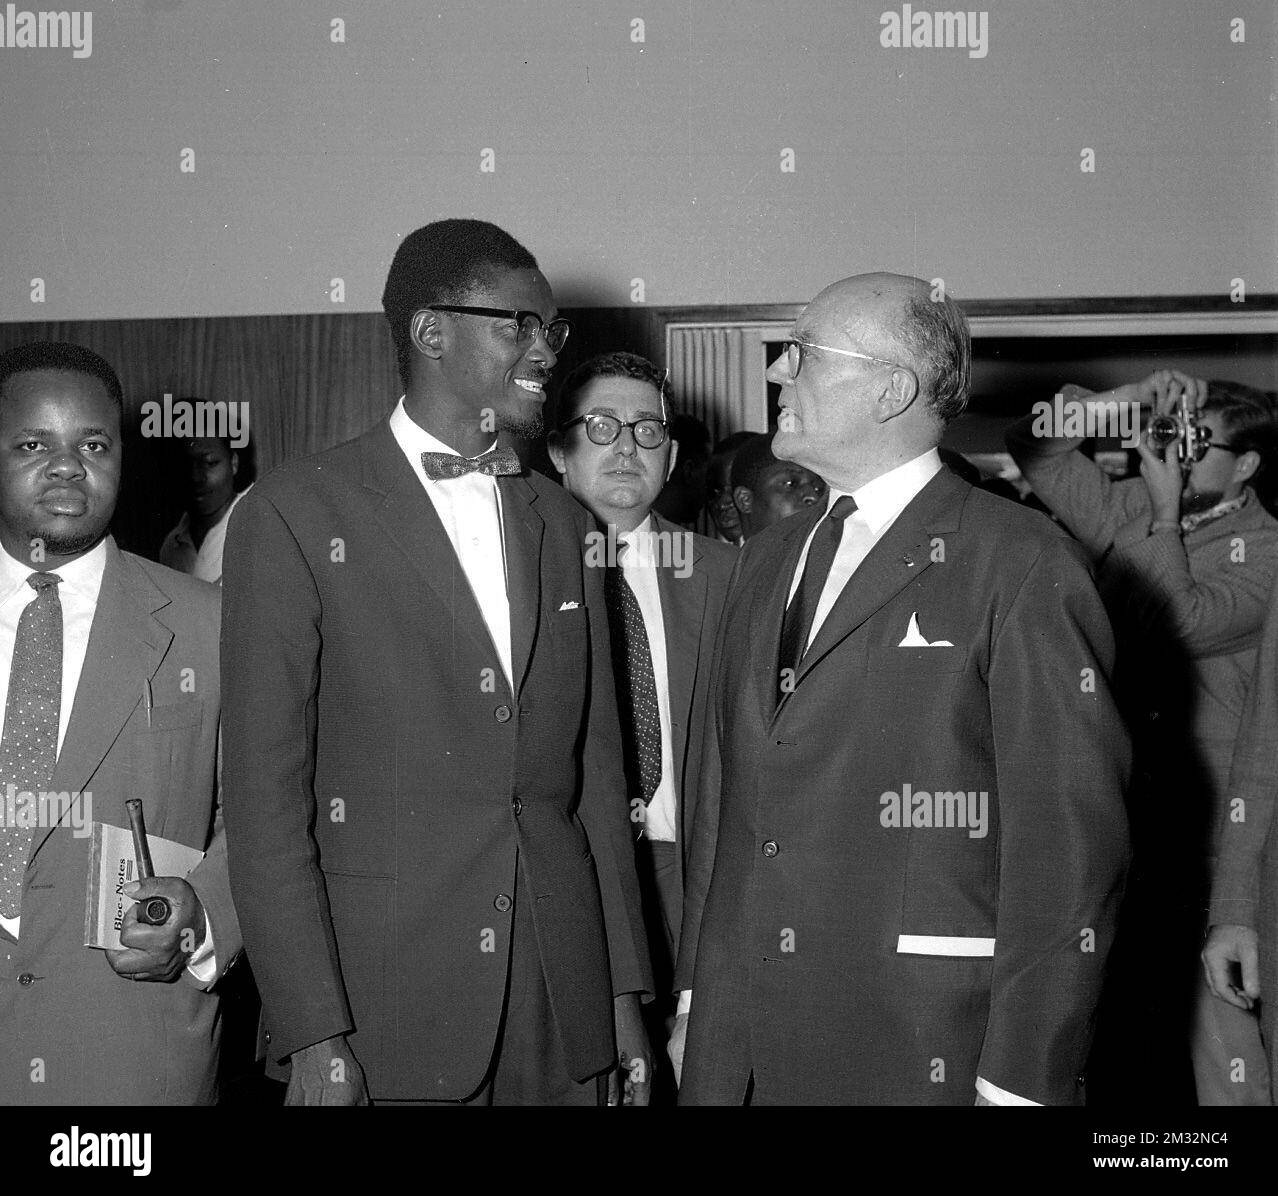 19600624 - LEOPOLDVILLE, CONGO: Prime Minister of the Republic of the Congo, Patrice Emery Lumumba  is seen with Belgian ministers at the official residence of Leopold II. on 25 June, 1960 in Leopoldville, Congo.   (Belga Archive) Stock Photo